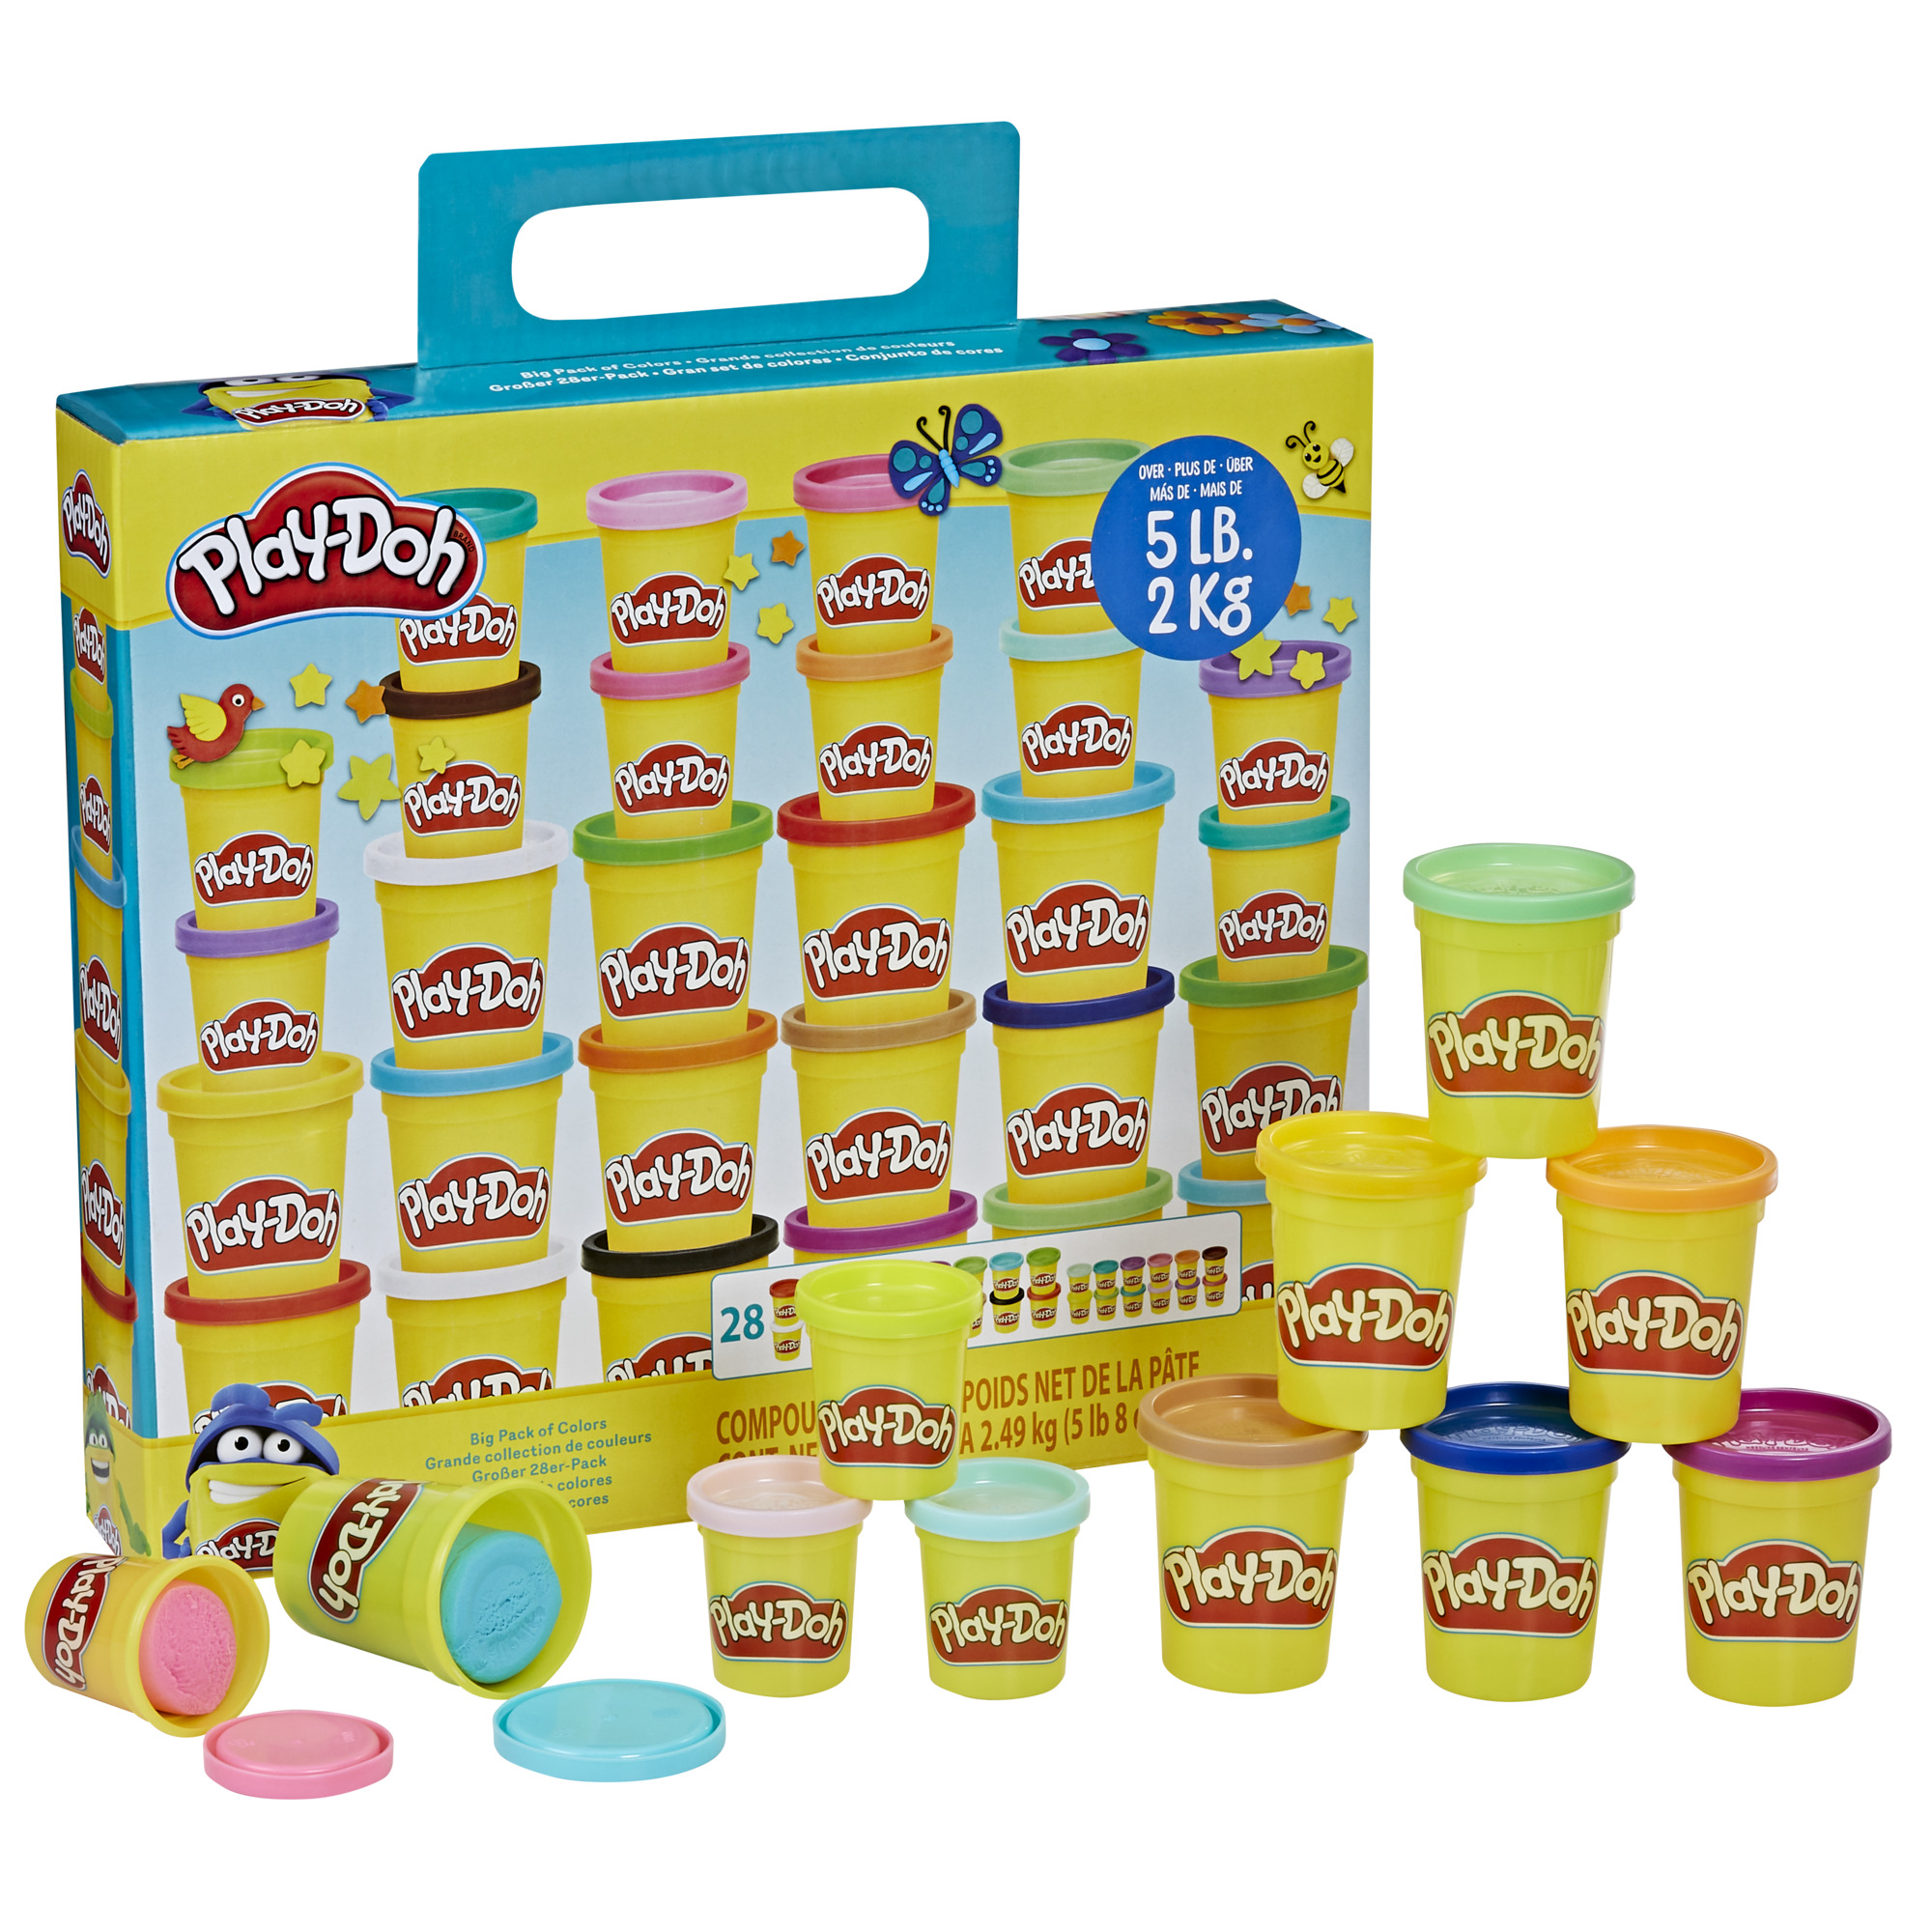 Play-Doh Big Pack of Colors Play Dough Set - 28 Color (28 Piece), Only at Walmart - image 1 of 4